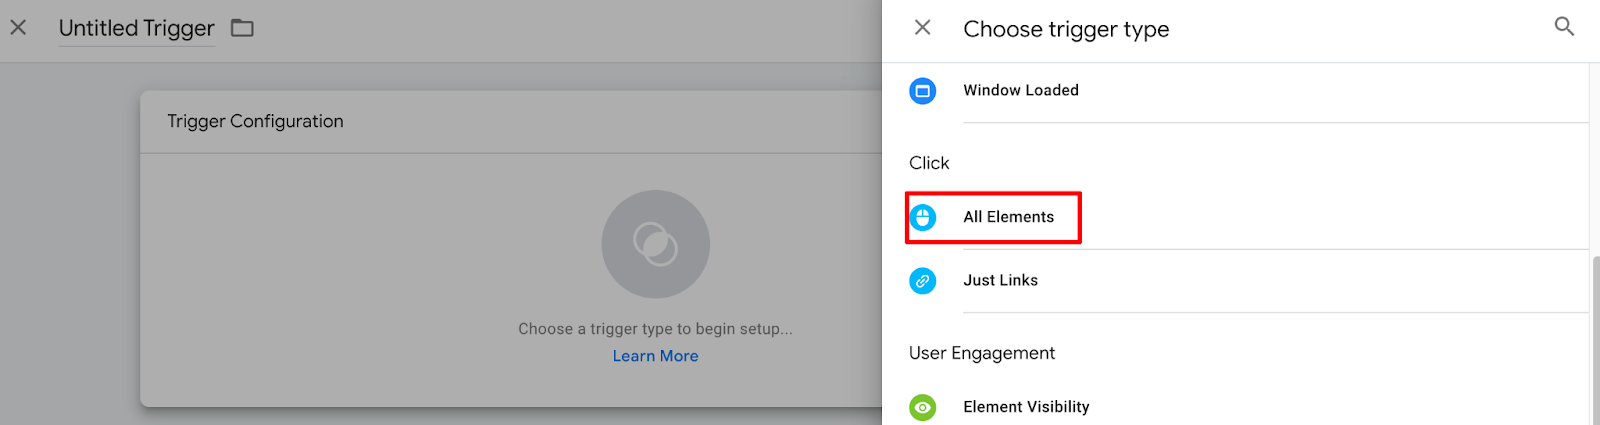 Choose Trigger Type → Click → All Elements.